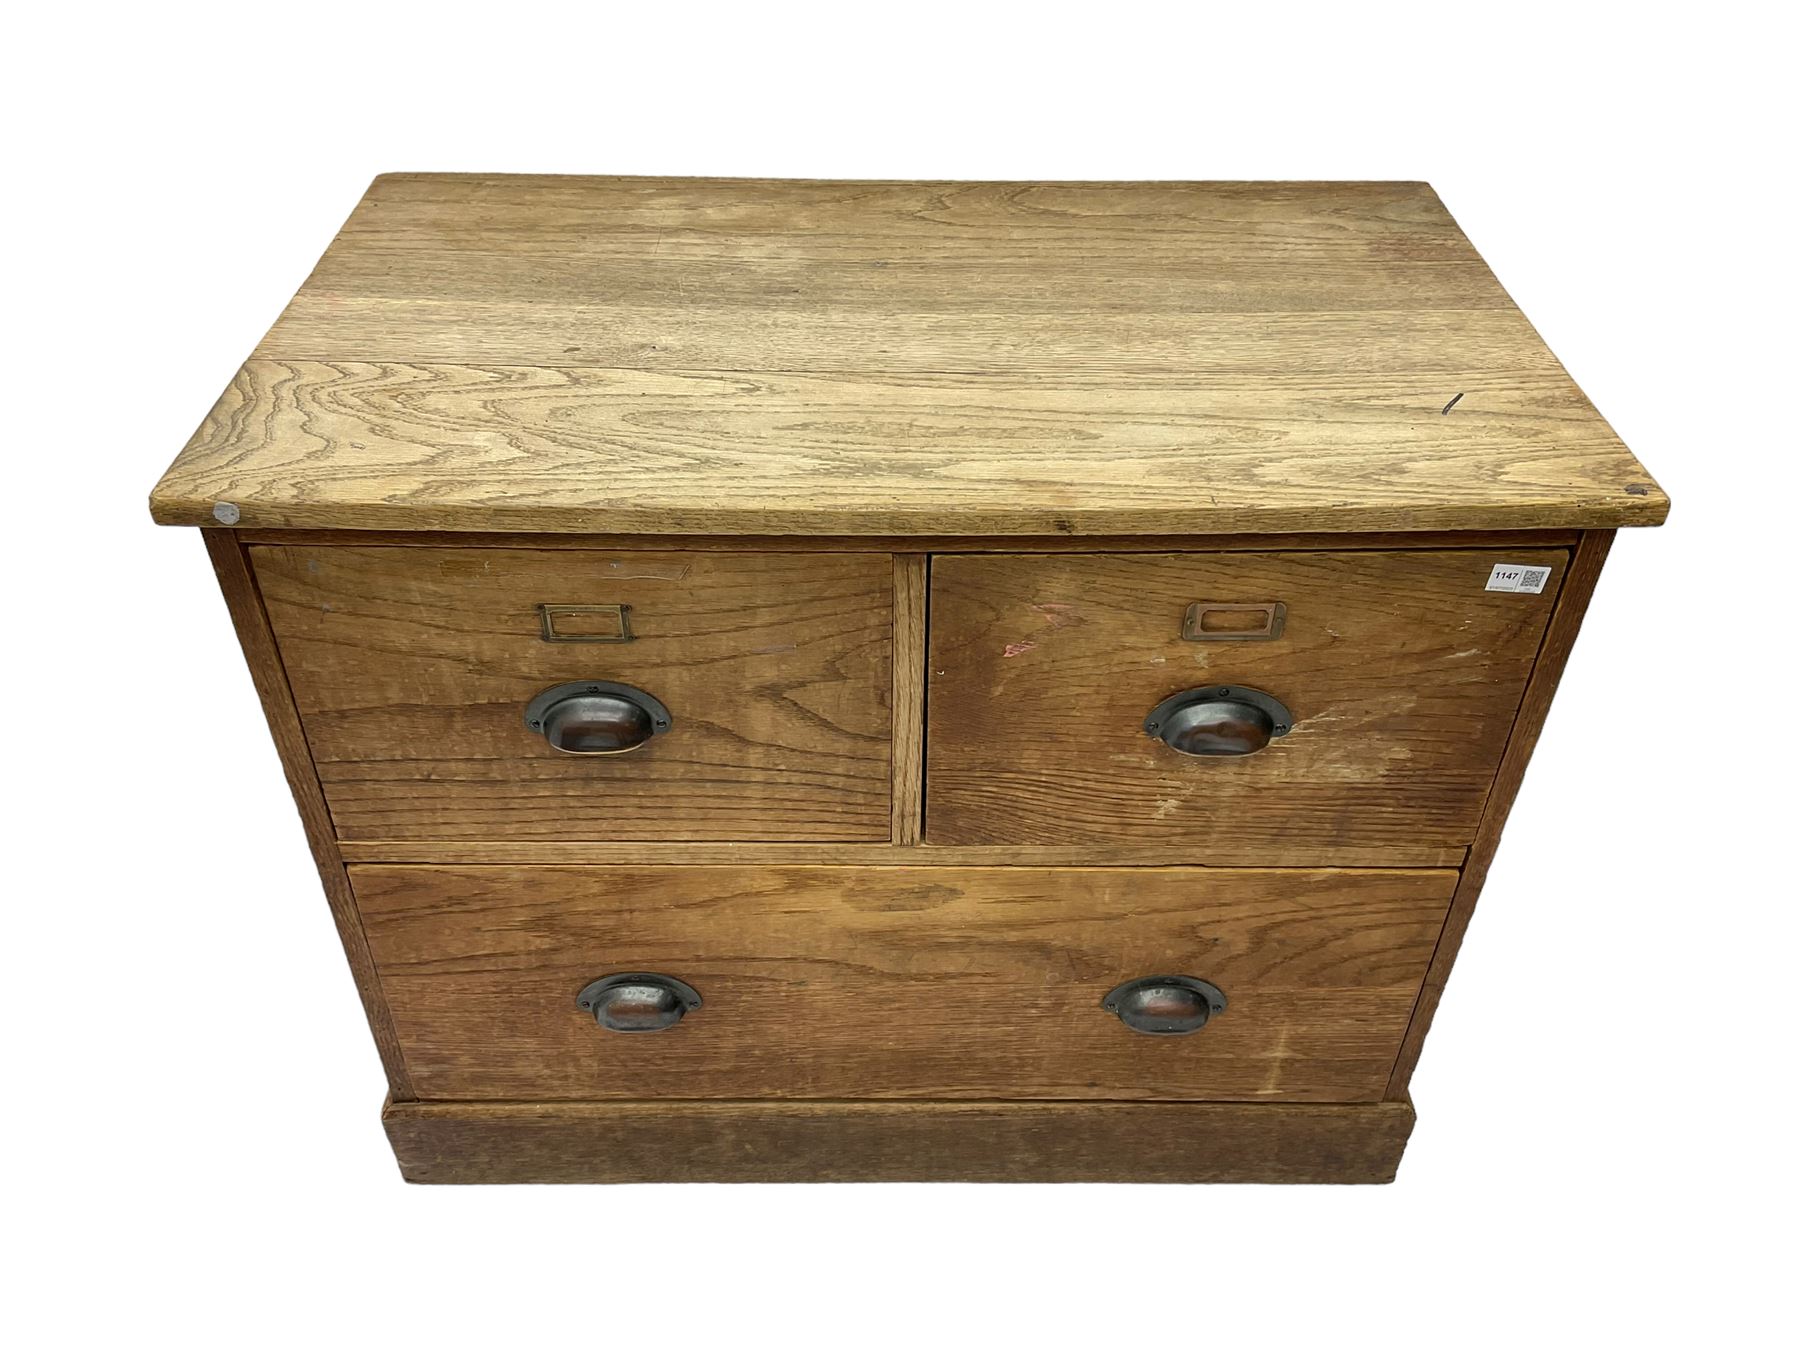 Early to mid-20th century oak chest - Image 2 of 6